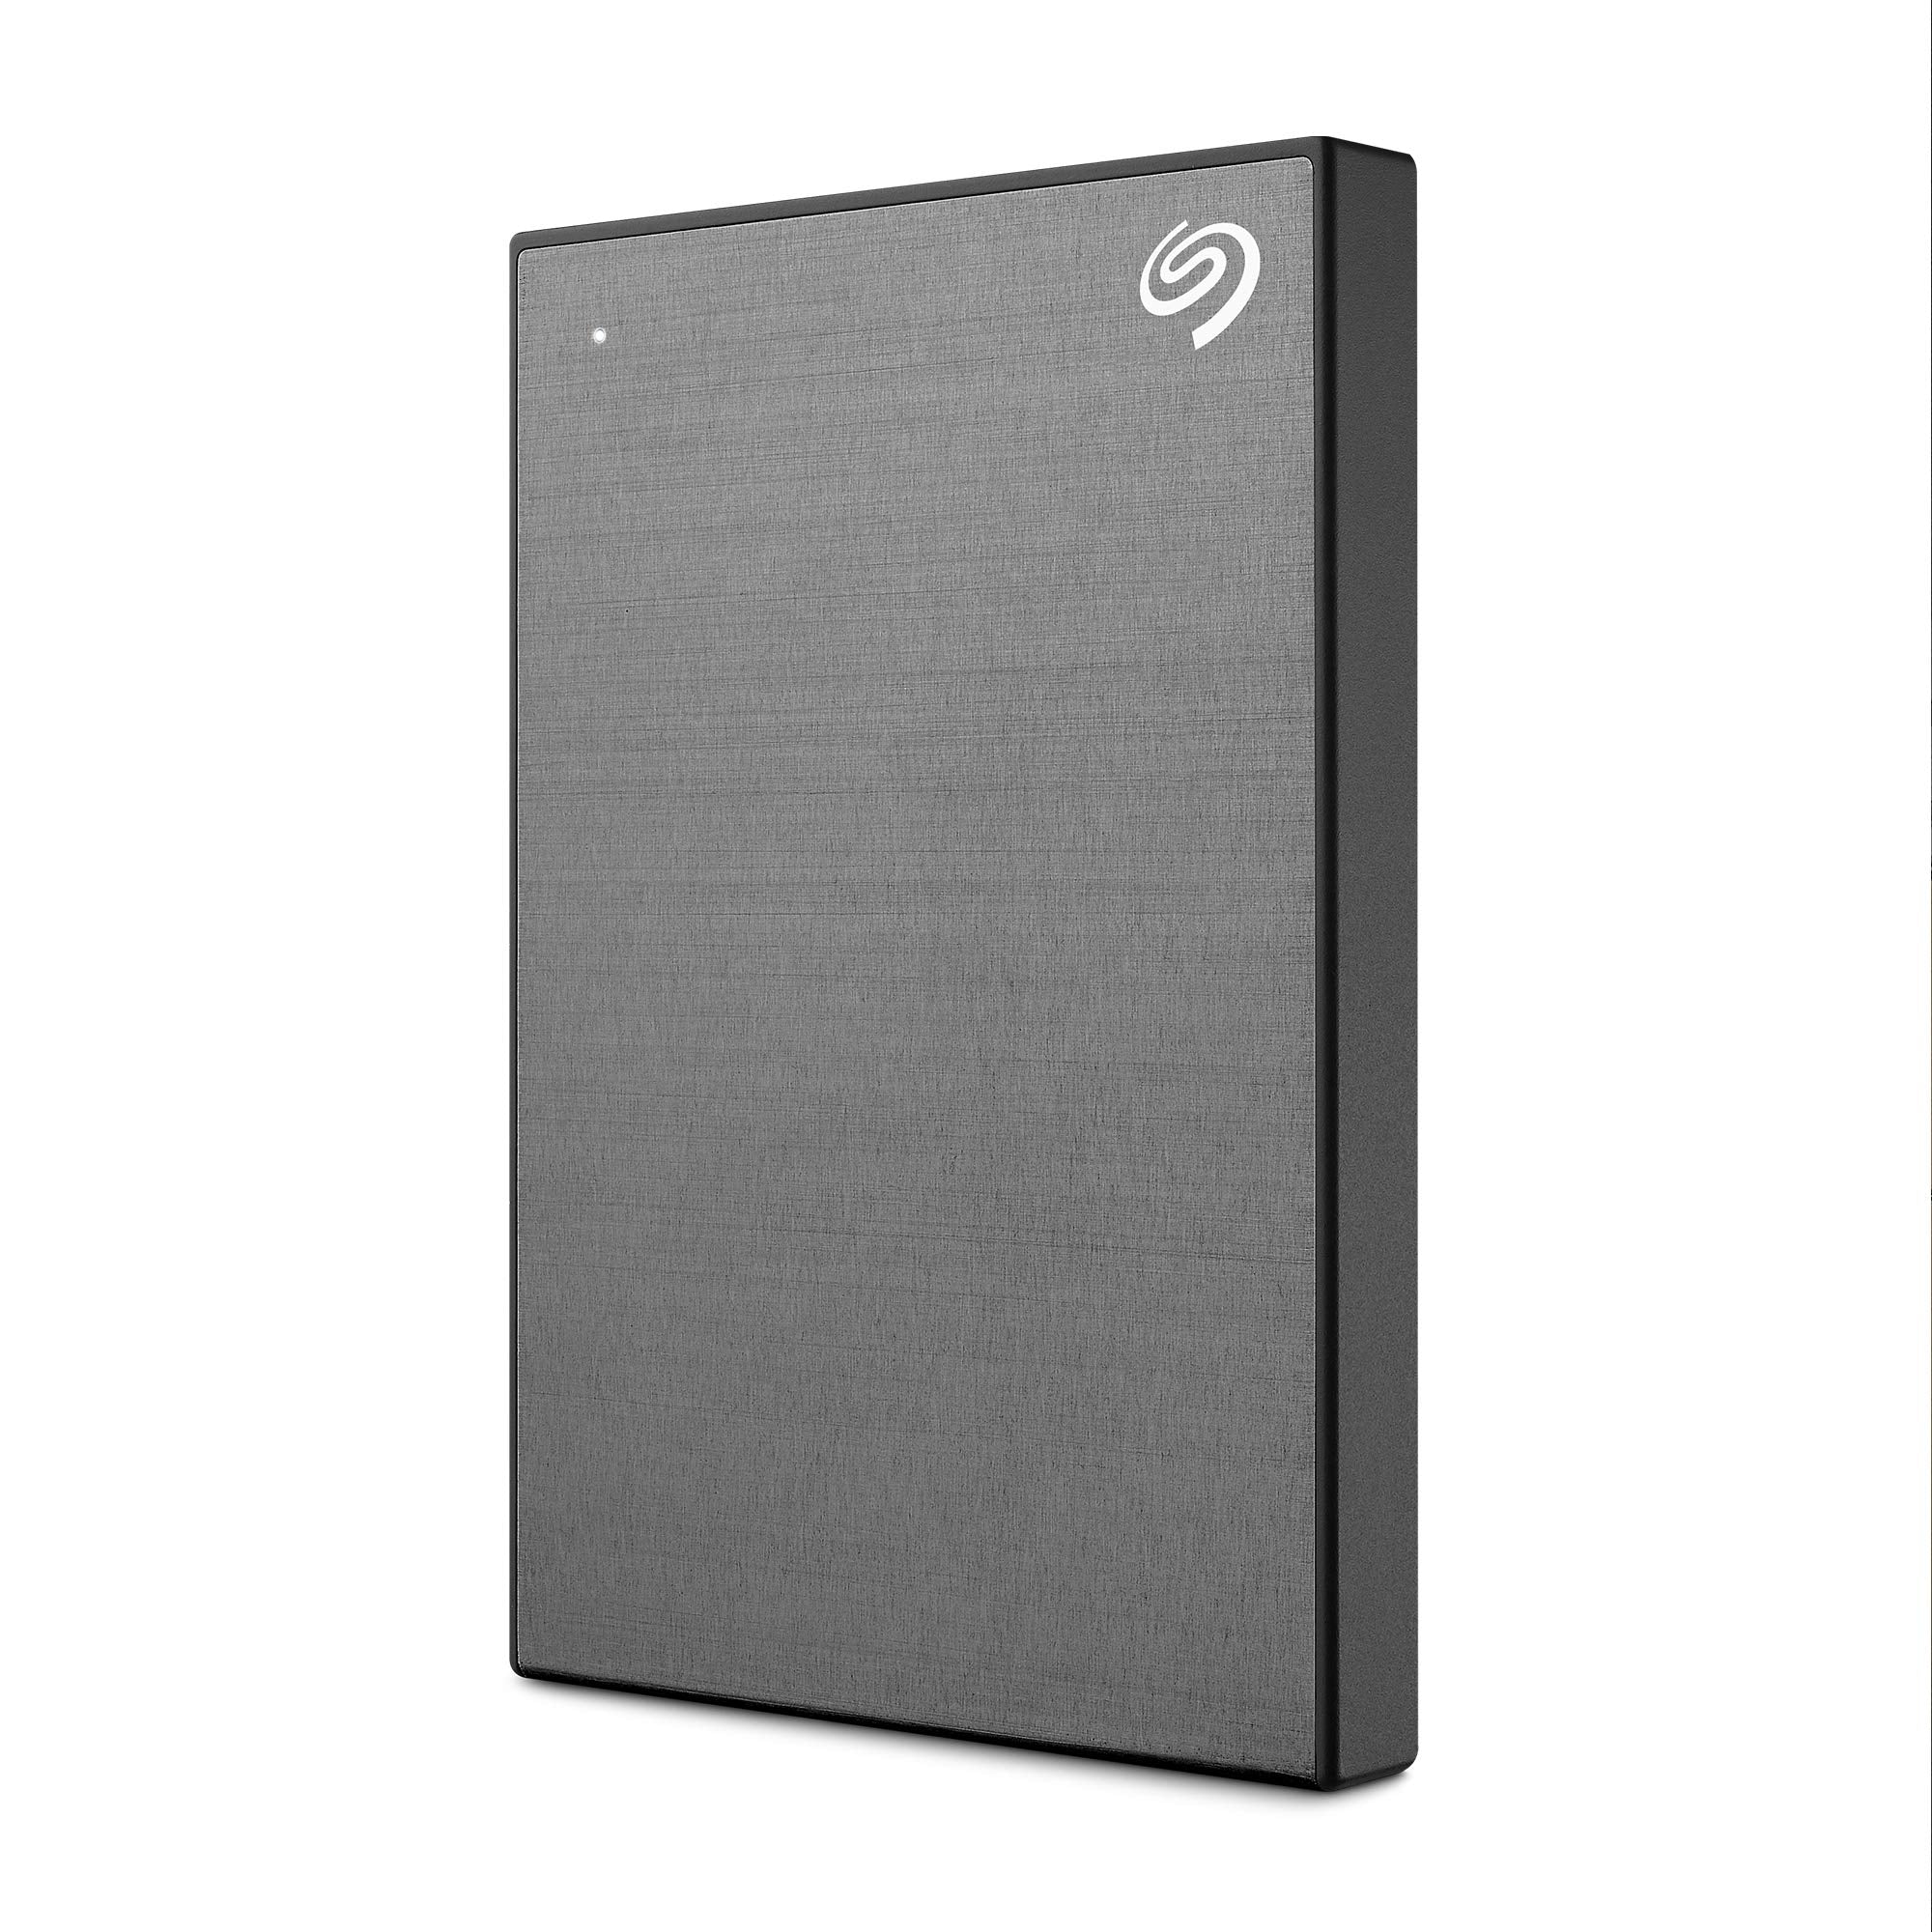 Seagate One Touch, Portable External Hard Drive, 1 TB, PC Notebook and Mac USB 3.0, Space Grey, 1 yr MylioCreate, 4 mo Adobe Creative Cloud Photography and Two-yr Rescue Services (STKB1000404)